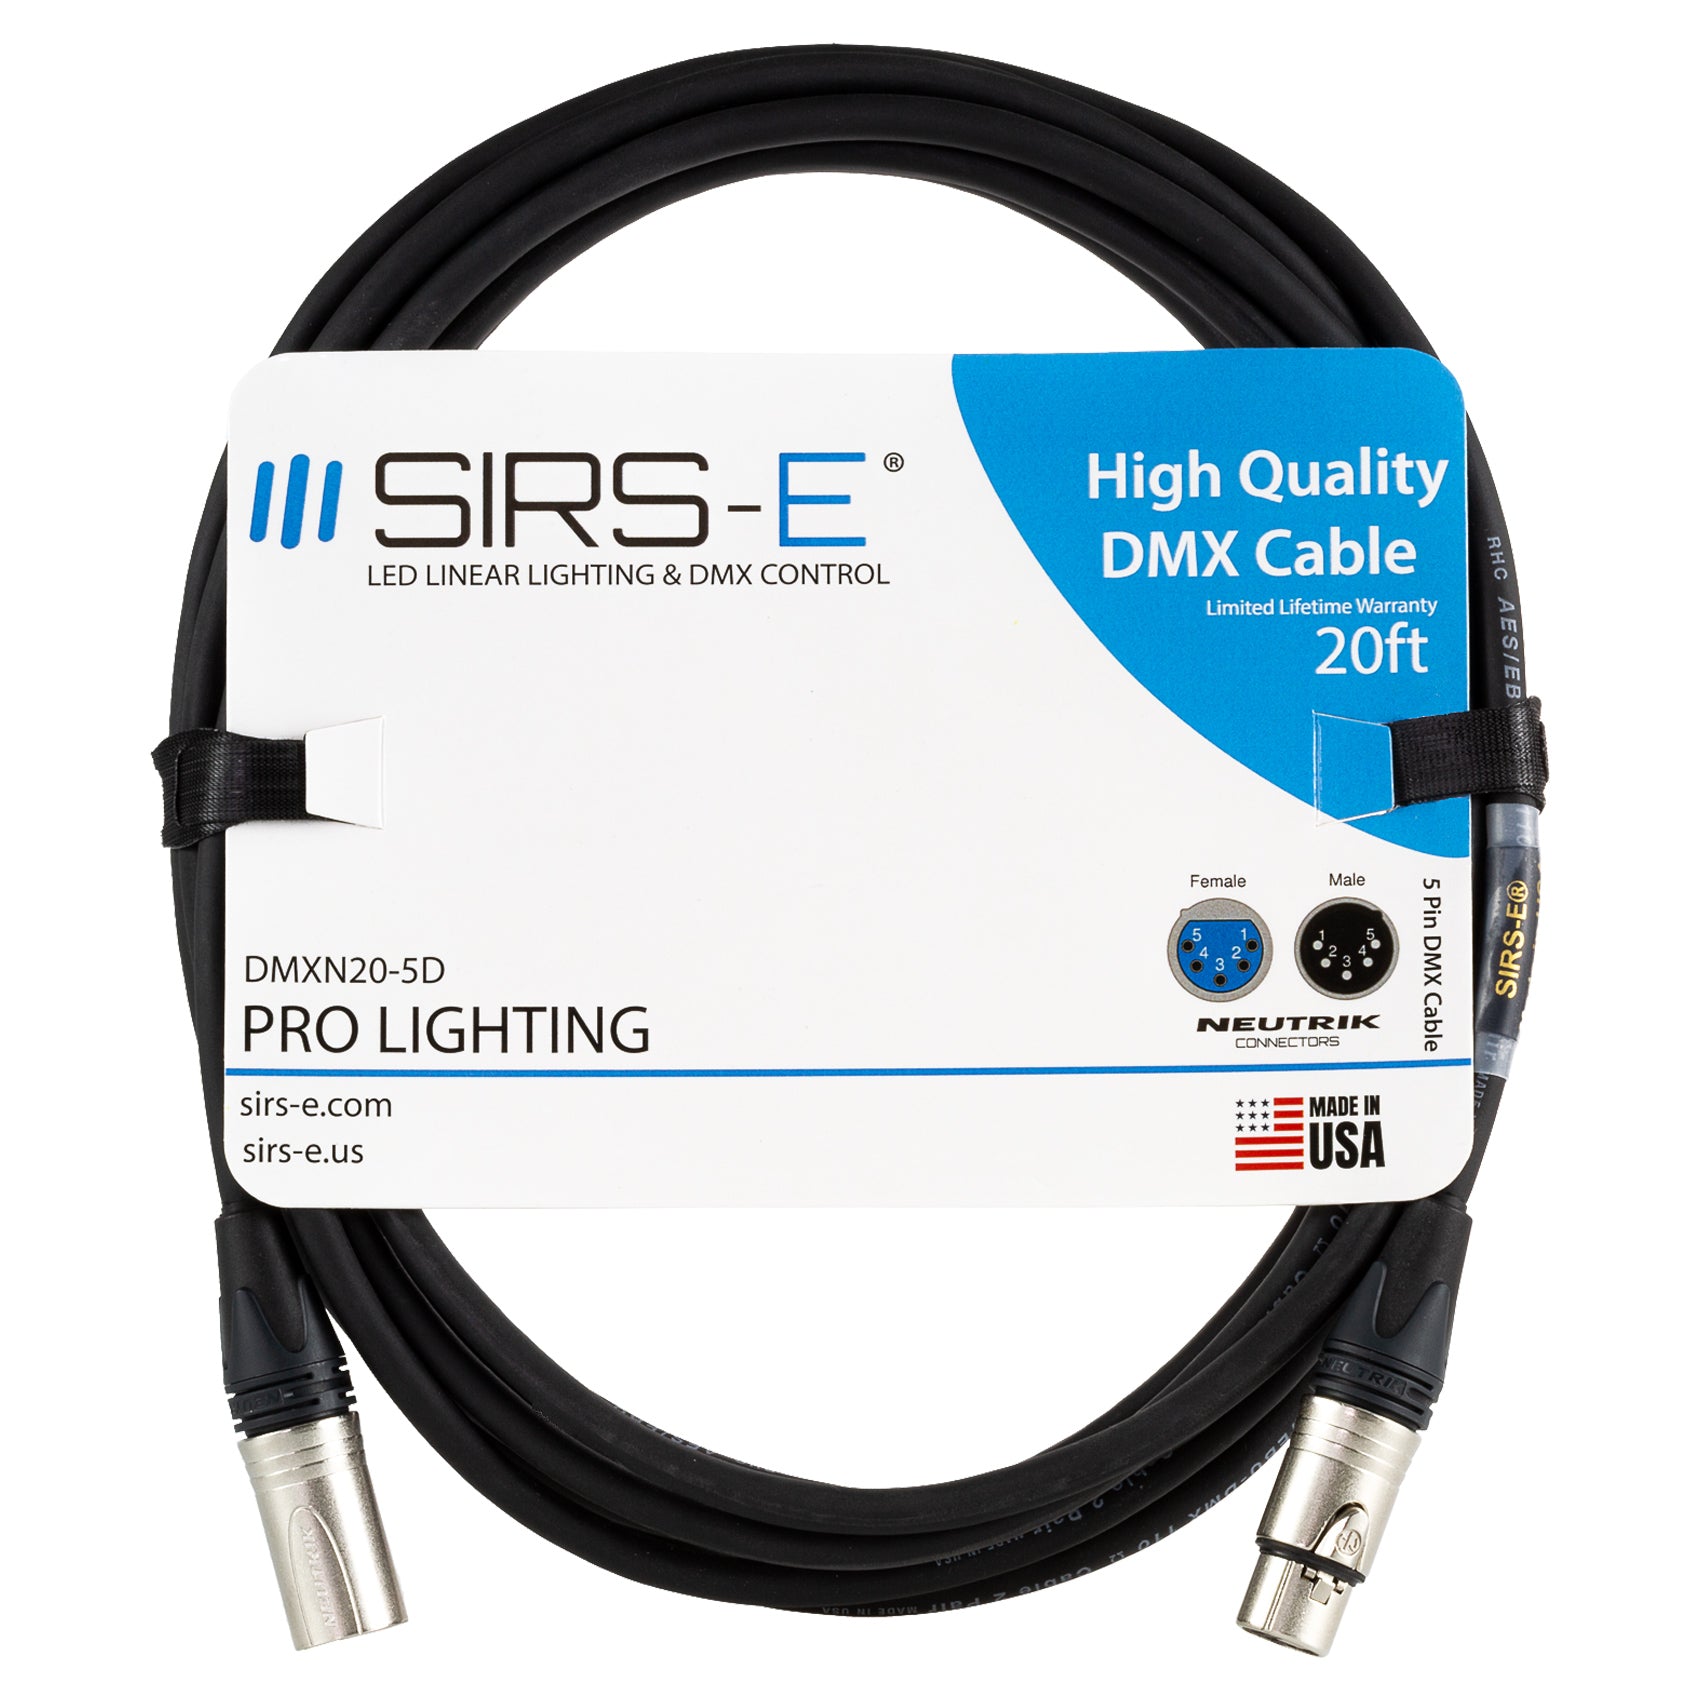 DMX512 XLR Cable 5-pin female to tinned bare wire, 39 inches long, 18AWG